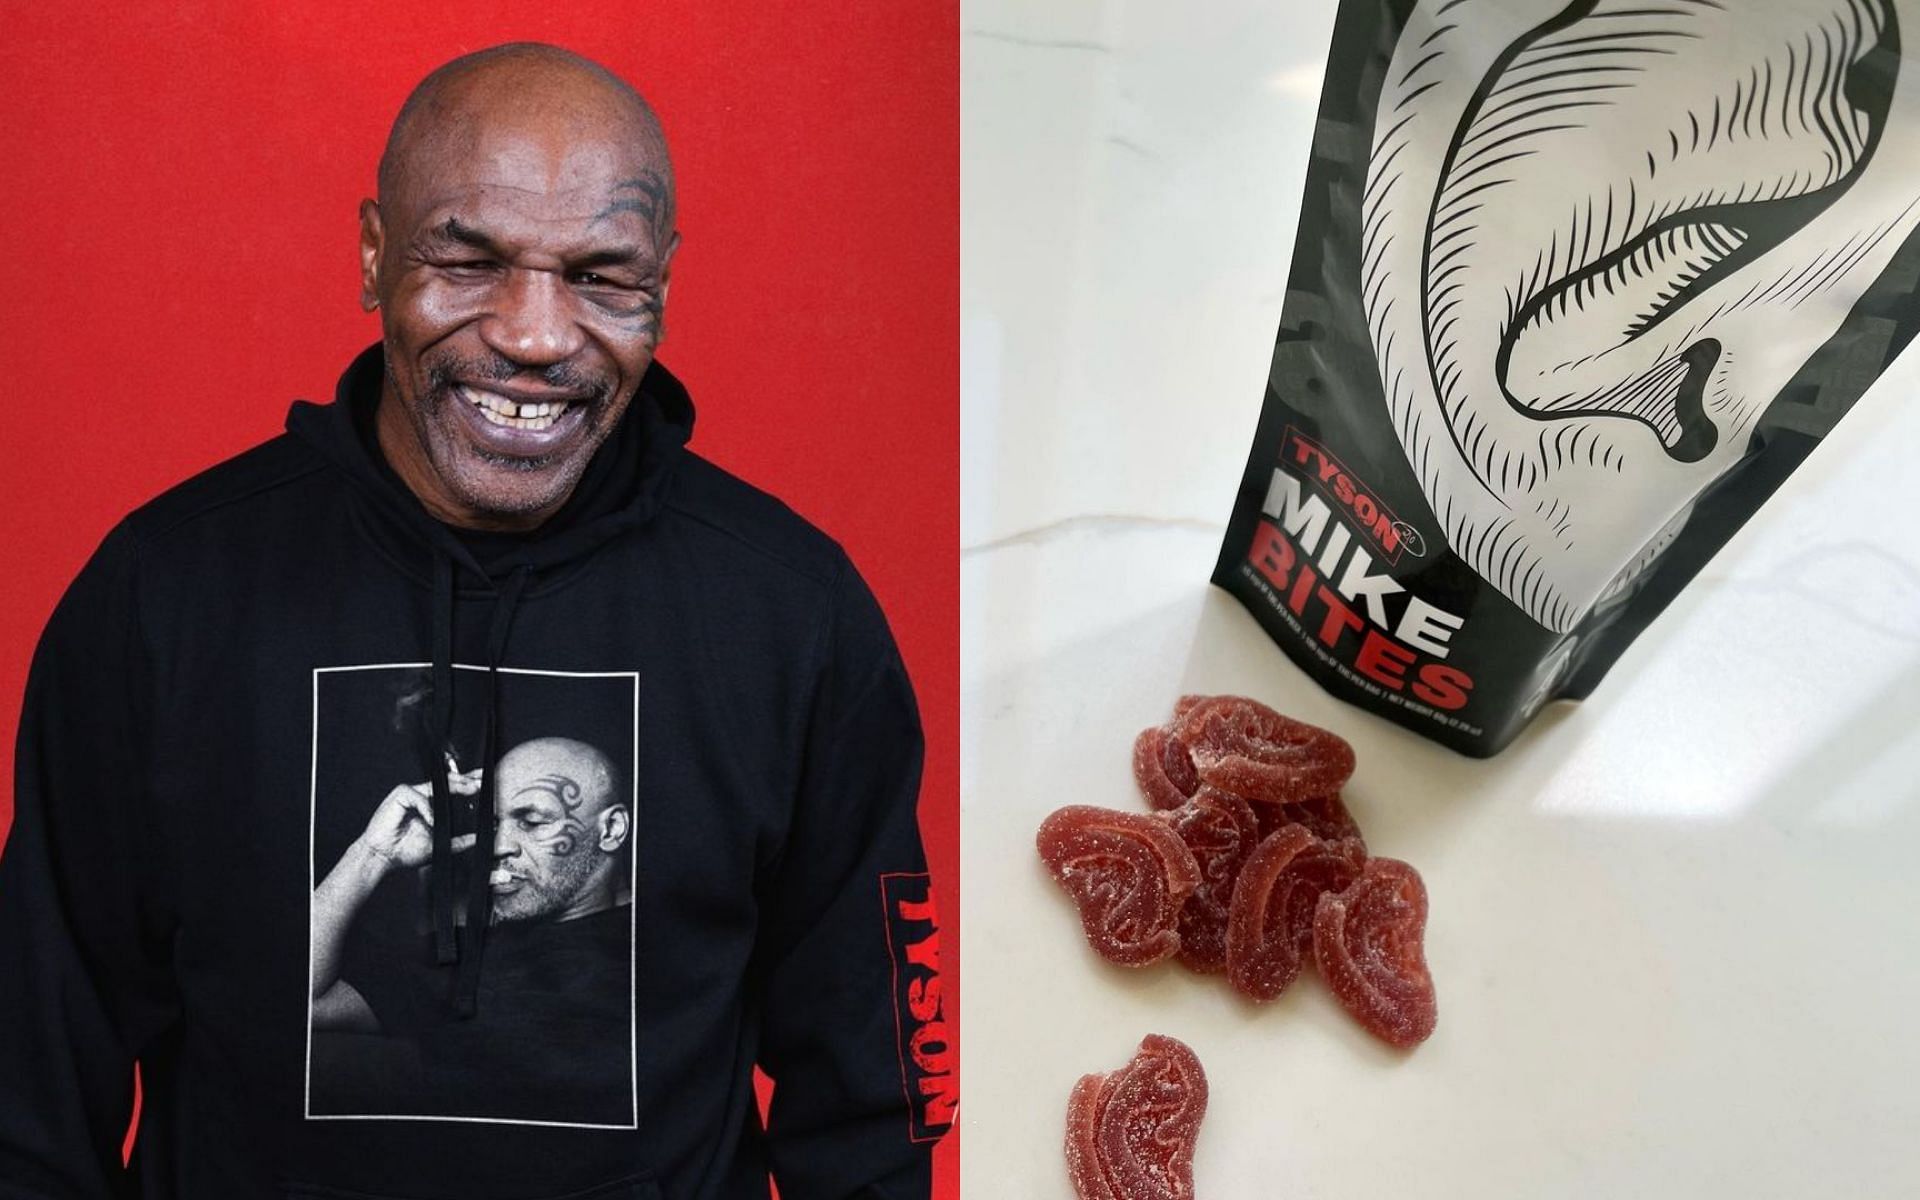 Mike Tyson (left); ear-shaped edibles launched by Tyson 2.0 (right). Image via. Instagram/Tyson2.0